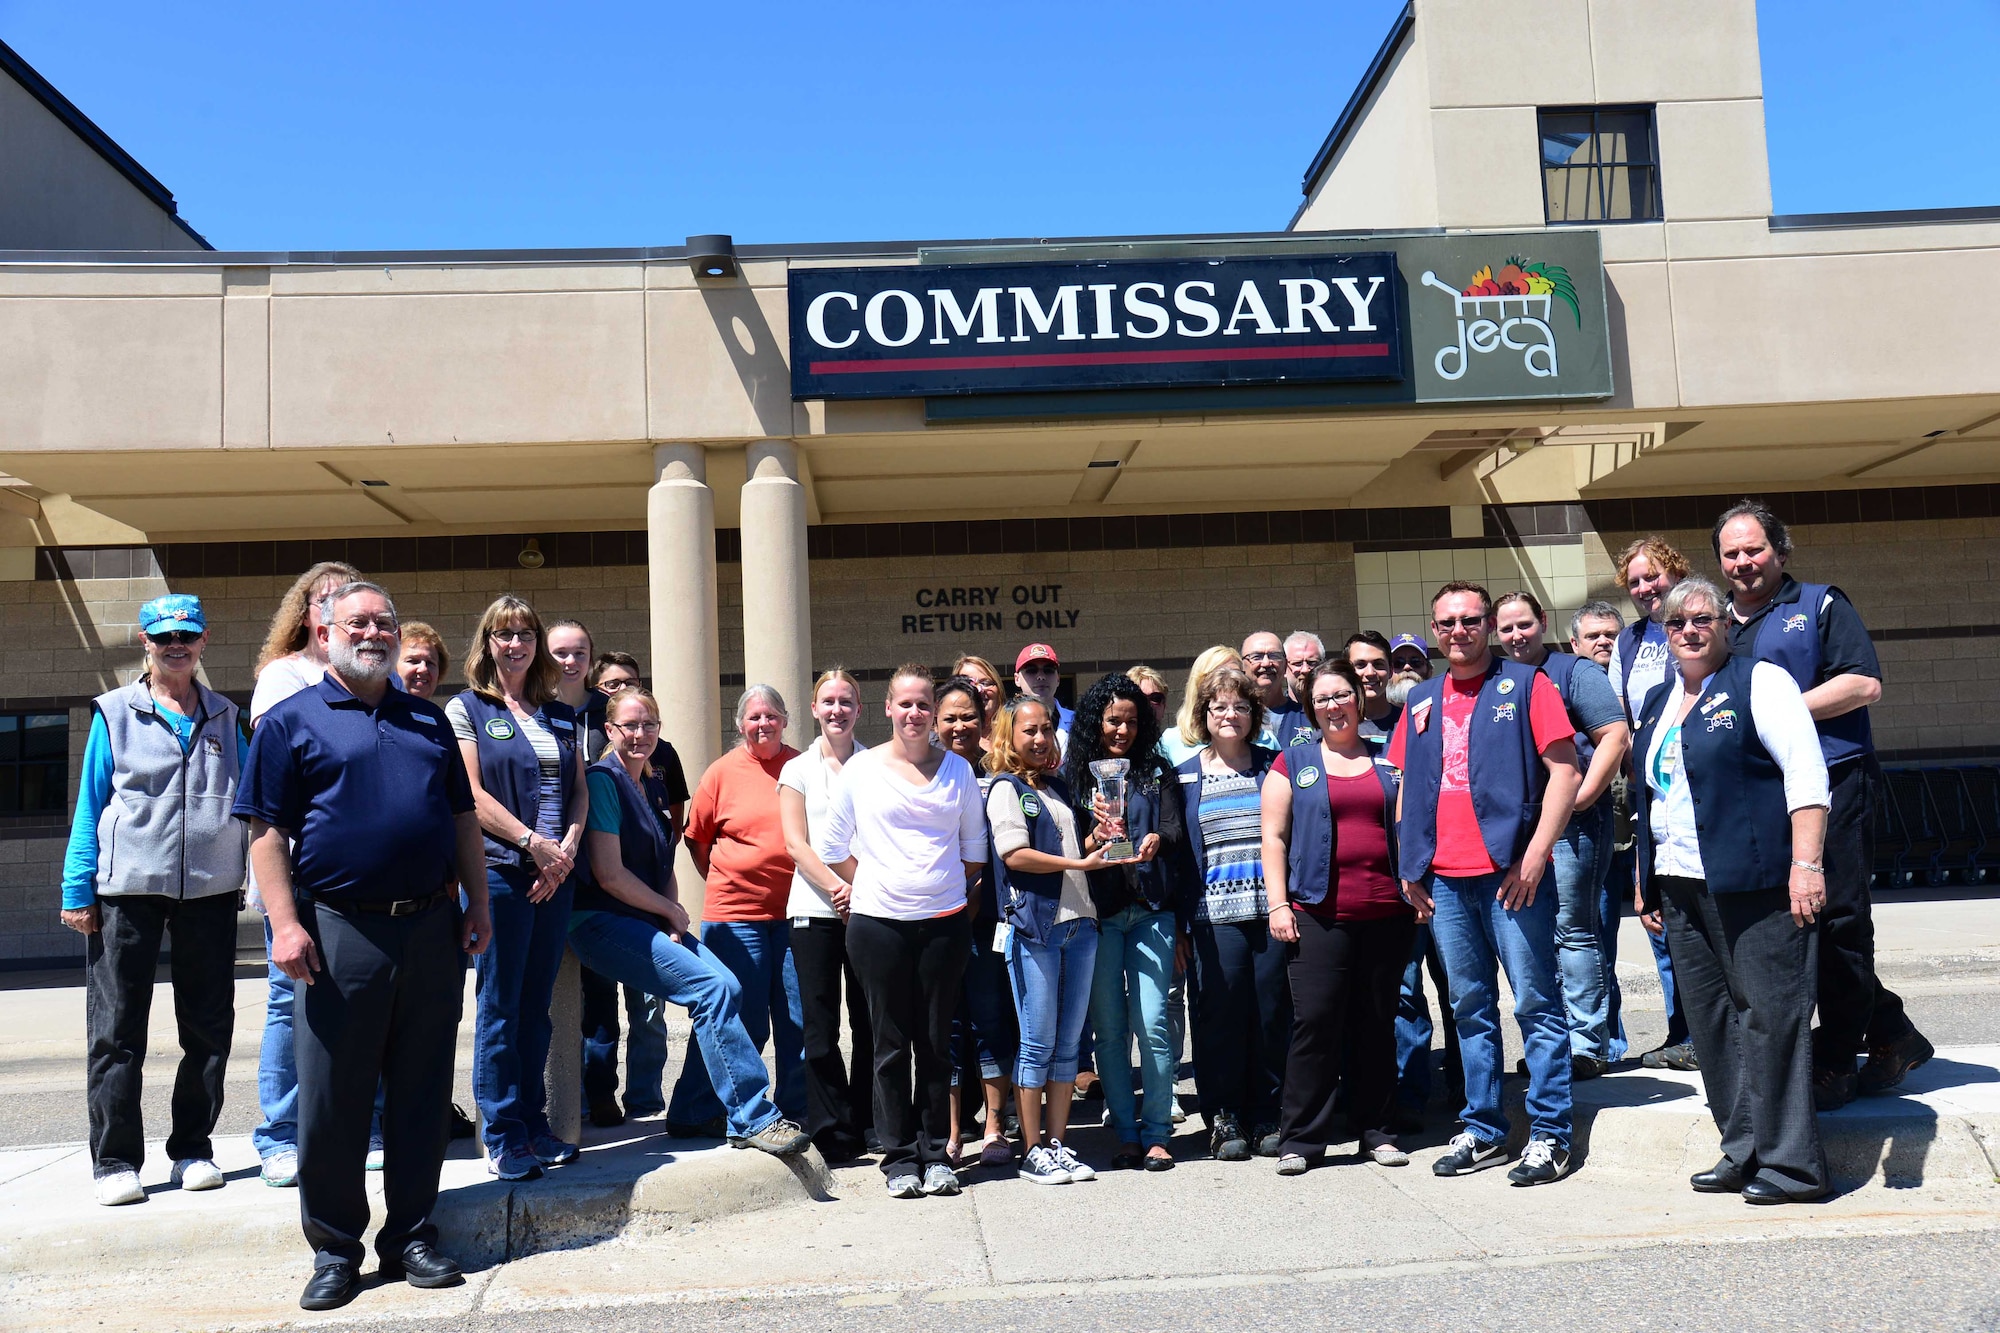 The Malmstrom Commissary team poses for a photo July 28, 2016, at Malmstrom Air Force Base, Mont. The Defense Commissary Agency awarded the Malmstrom Commissary the Bill Nichols Award for Best Large Commissary in the United States. (U.S. Air Force photo/Airman 1st Class Magen M. Reeves)